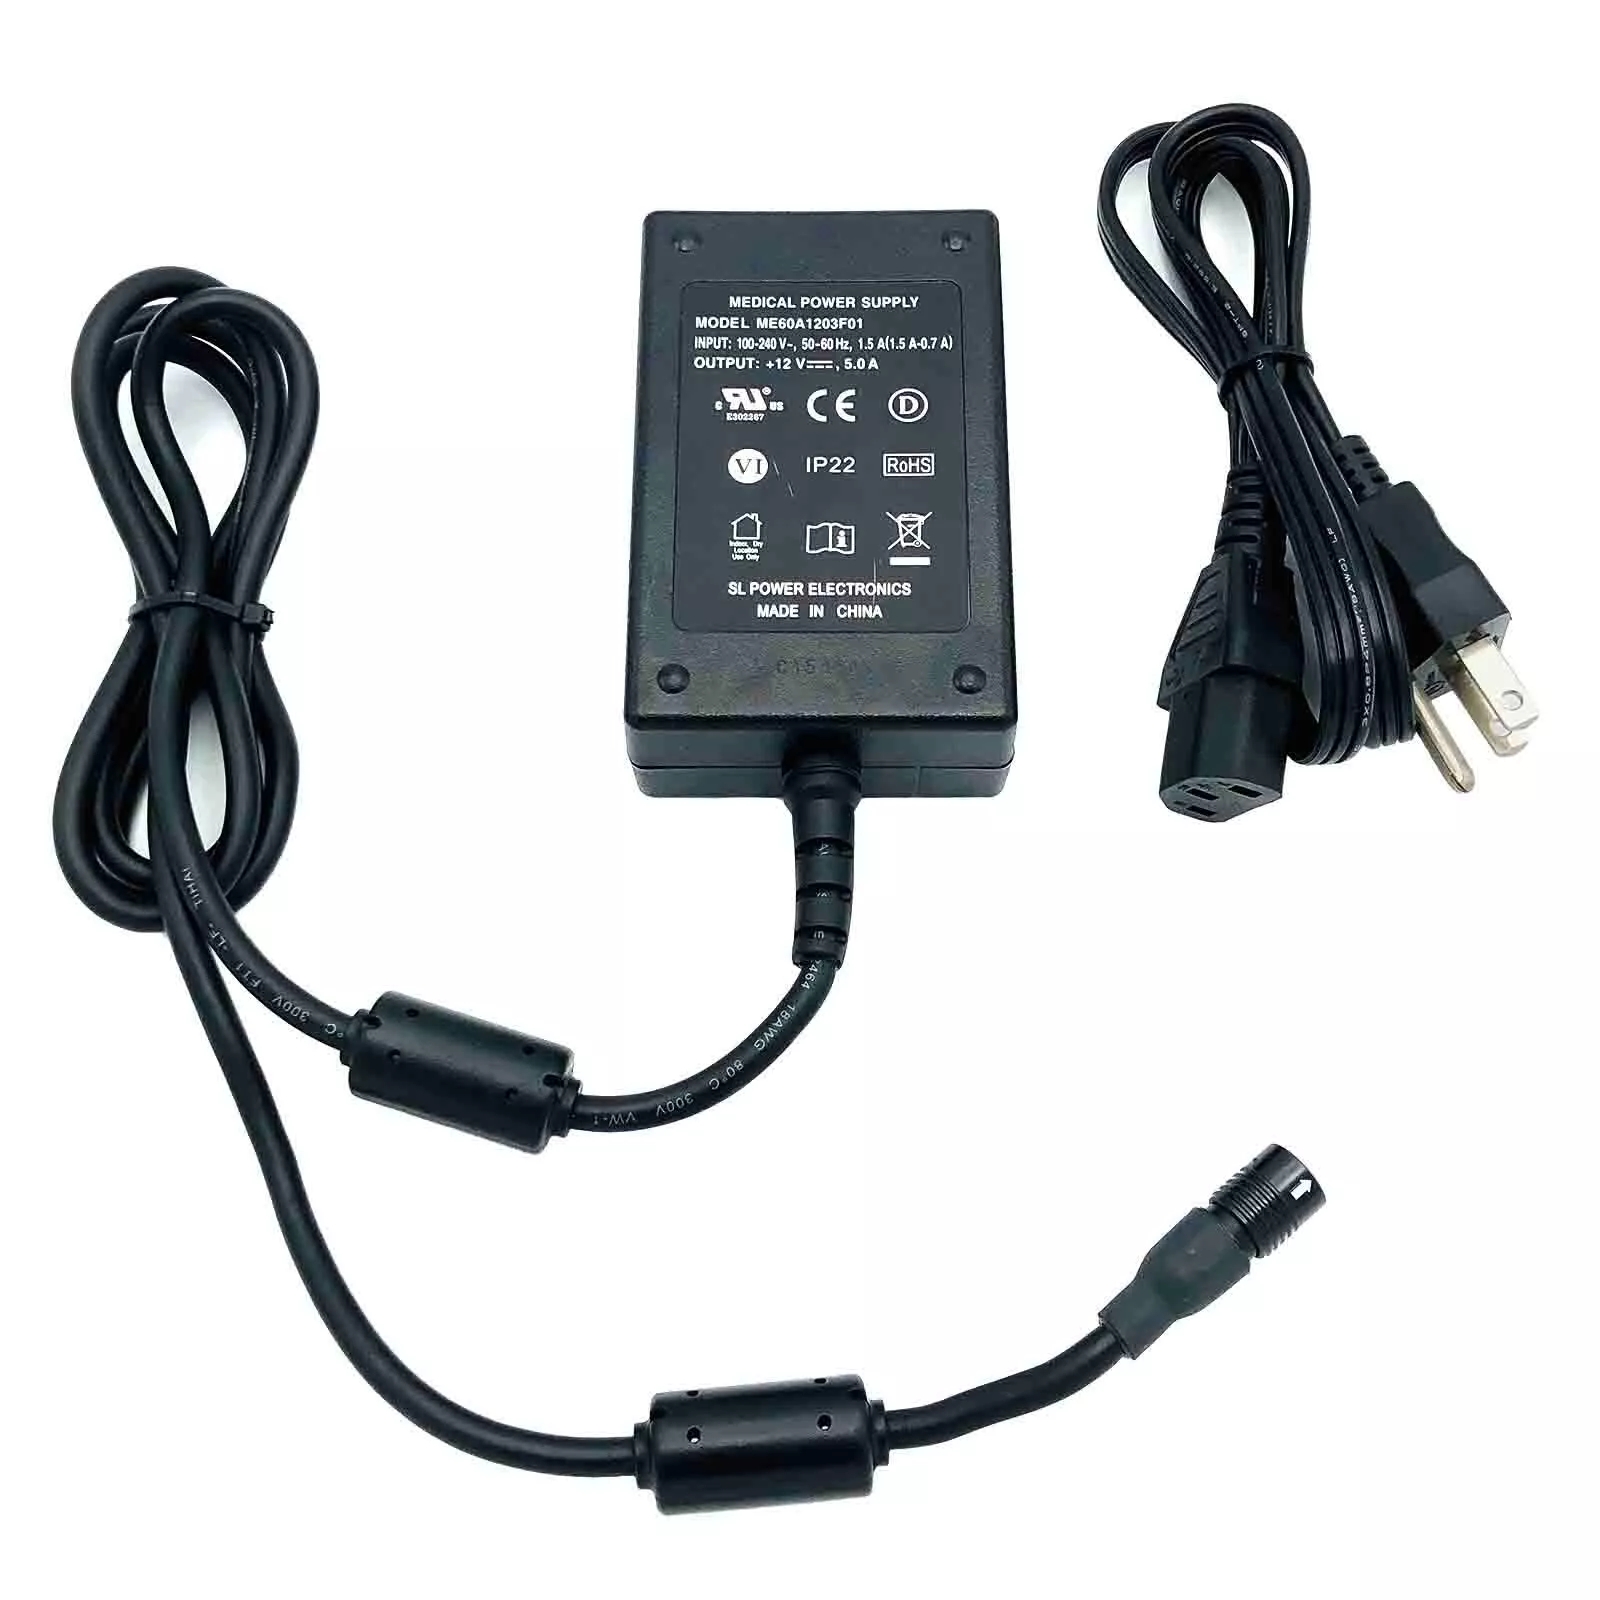 *Brand NEW*Genuine Medical ME60A1203F01 12V 5.0A 60W AC Adapter 3-pin Power Supply